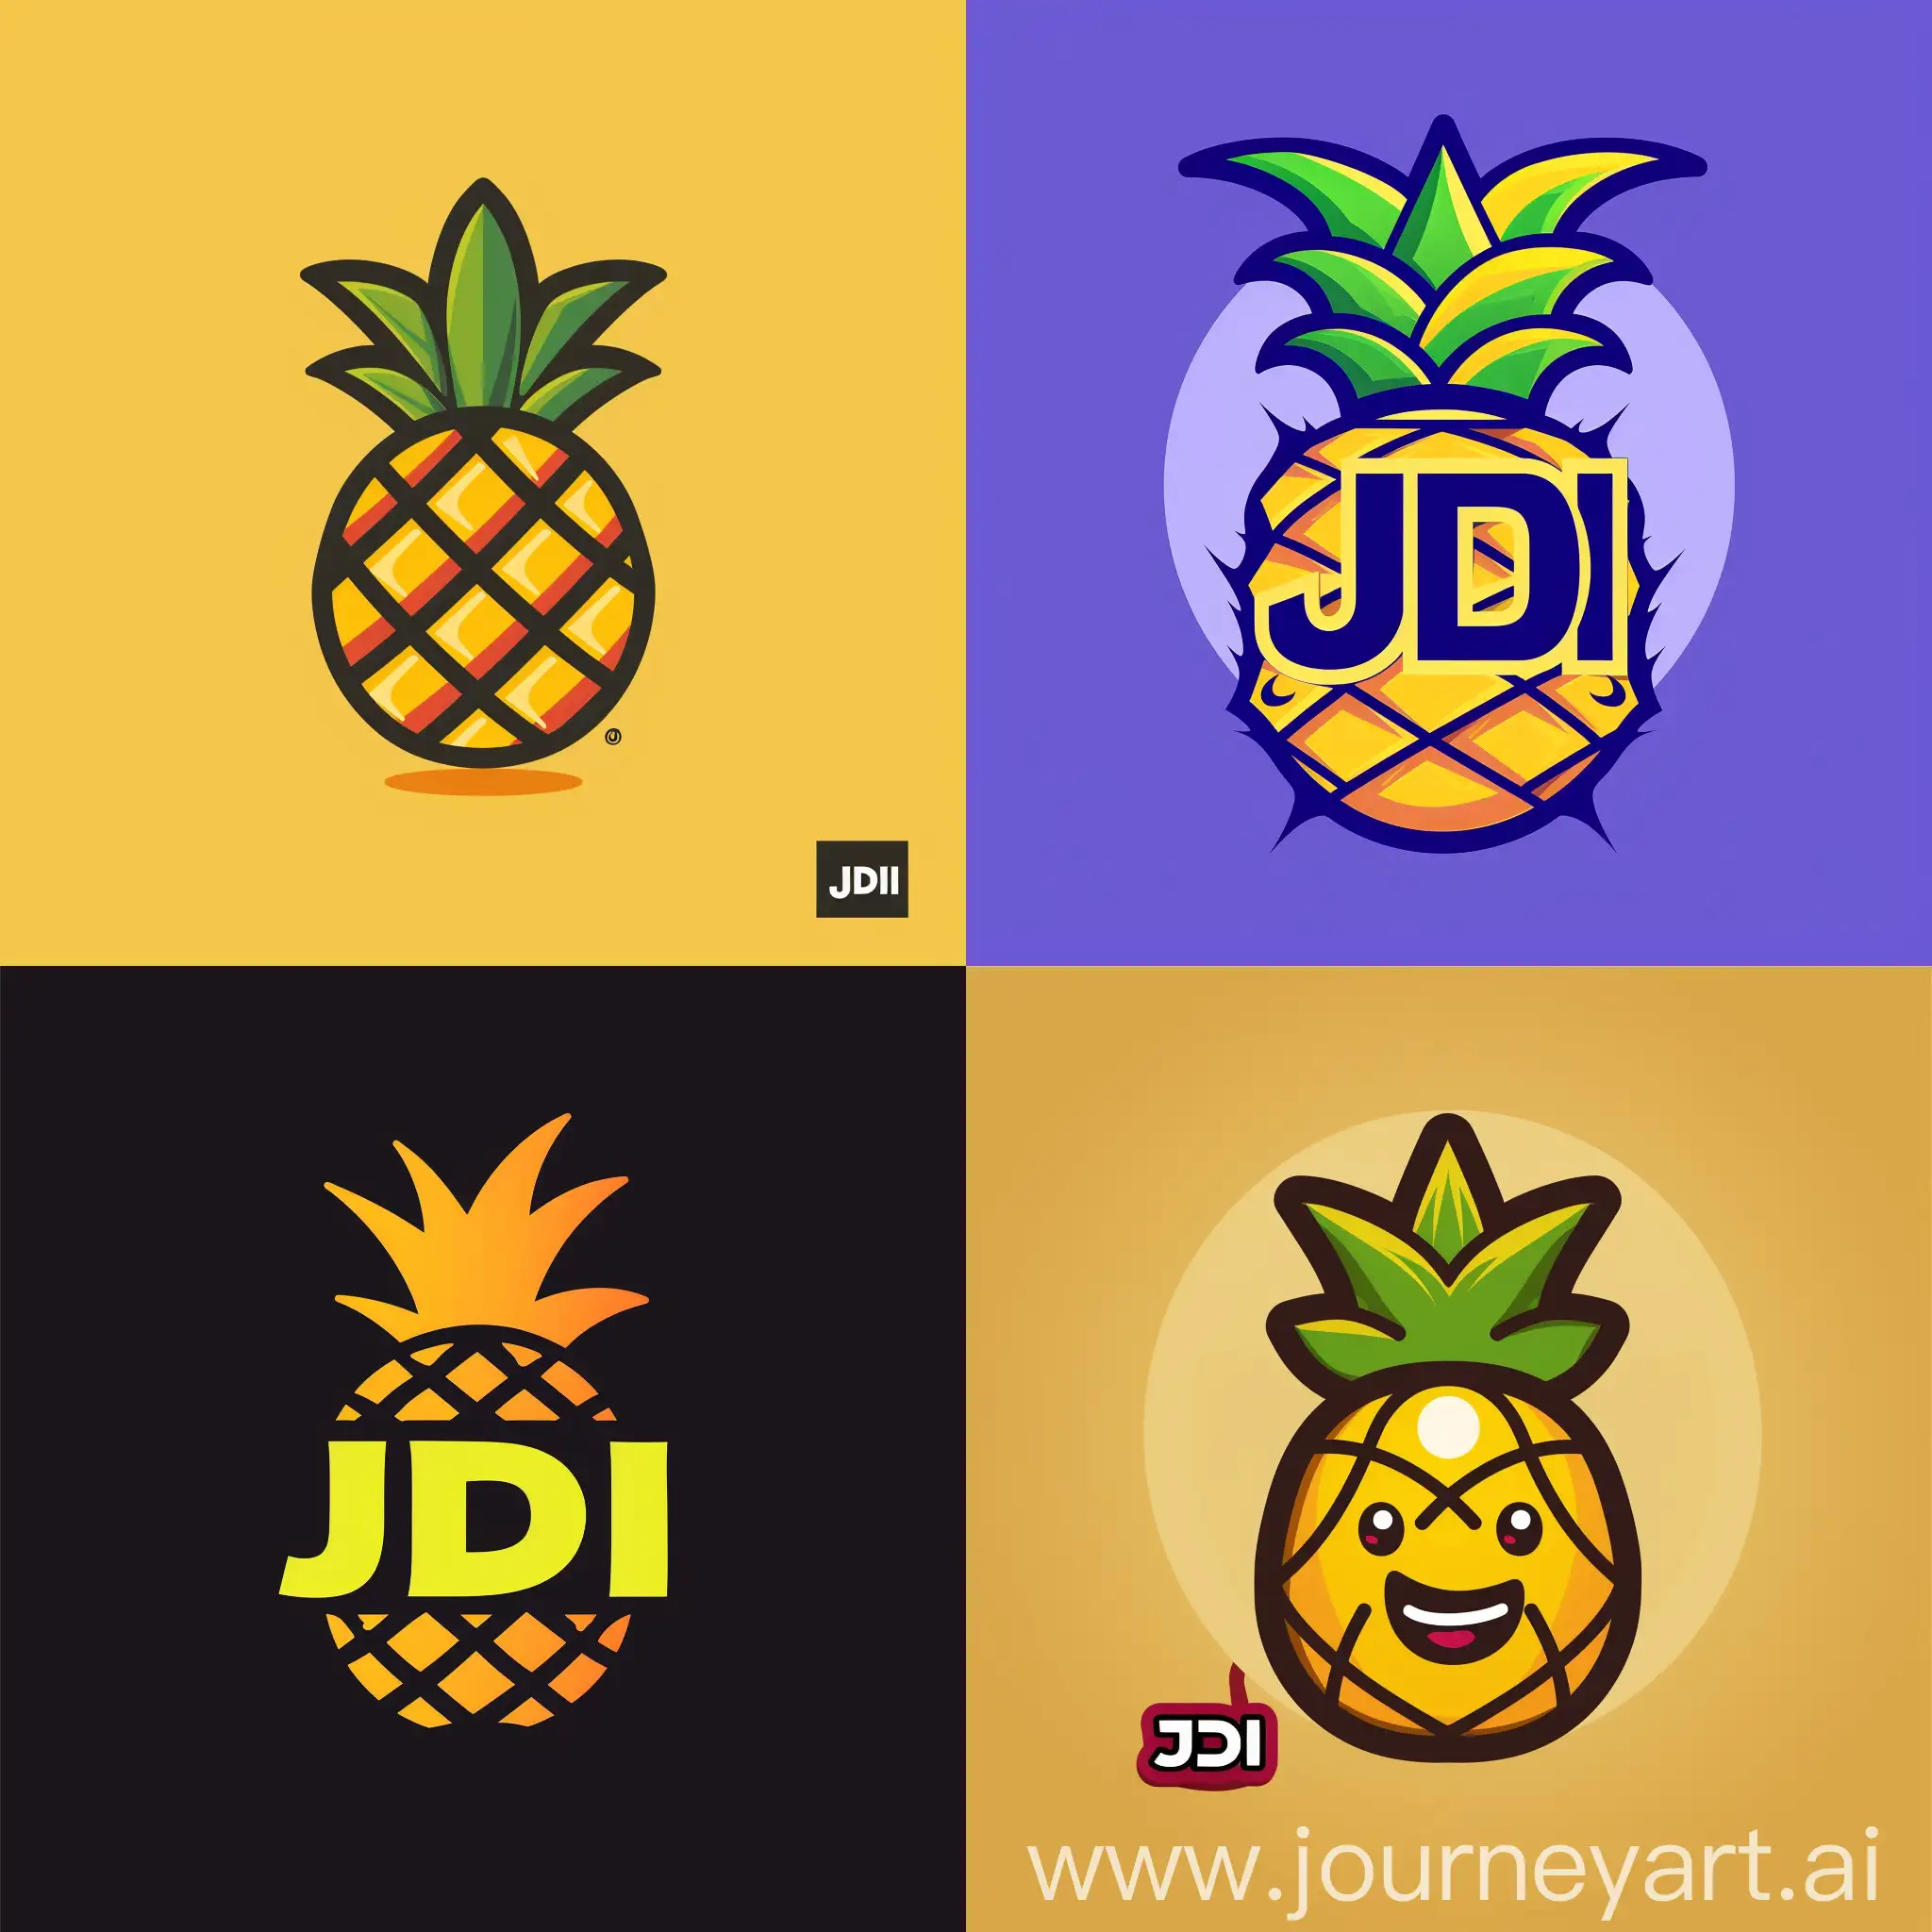 Logo for JDI company which is specialised on site developing, a mascot of this company is pineapple